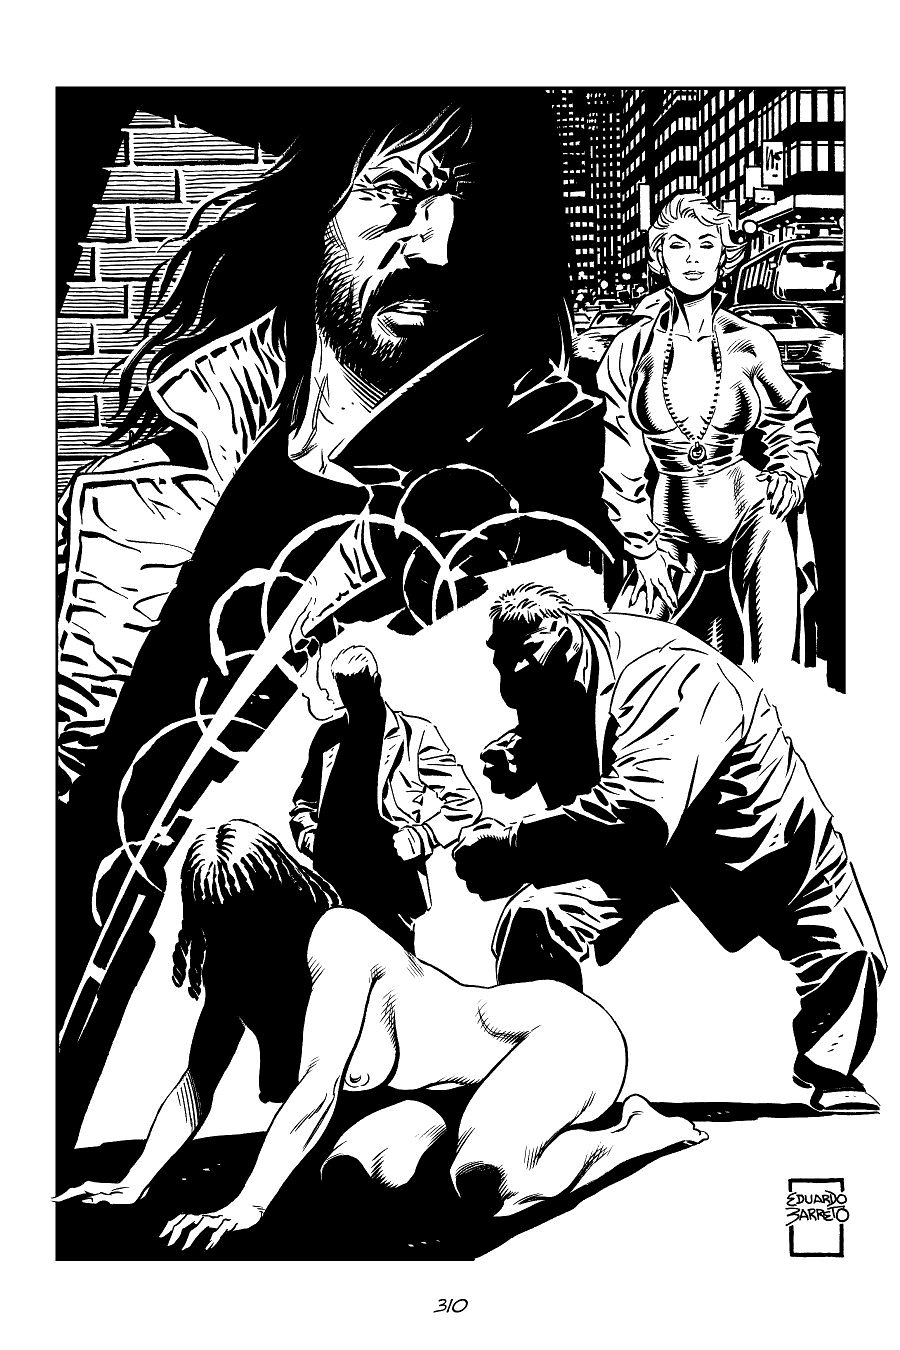 page 310 of sin city 7 hell and back